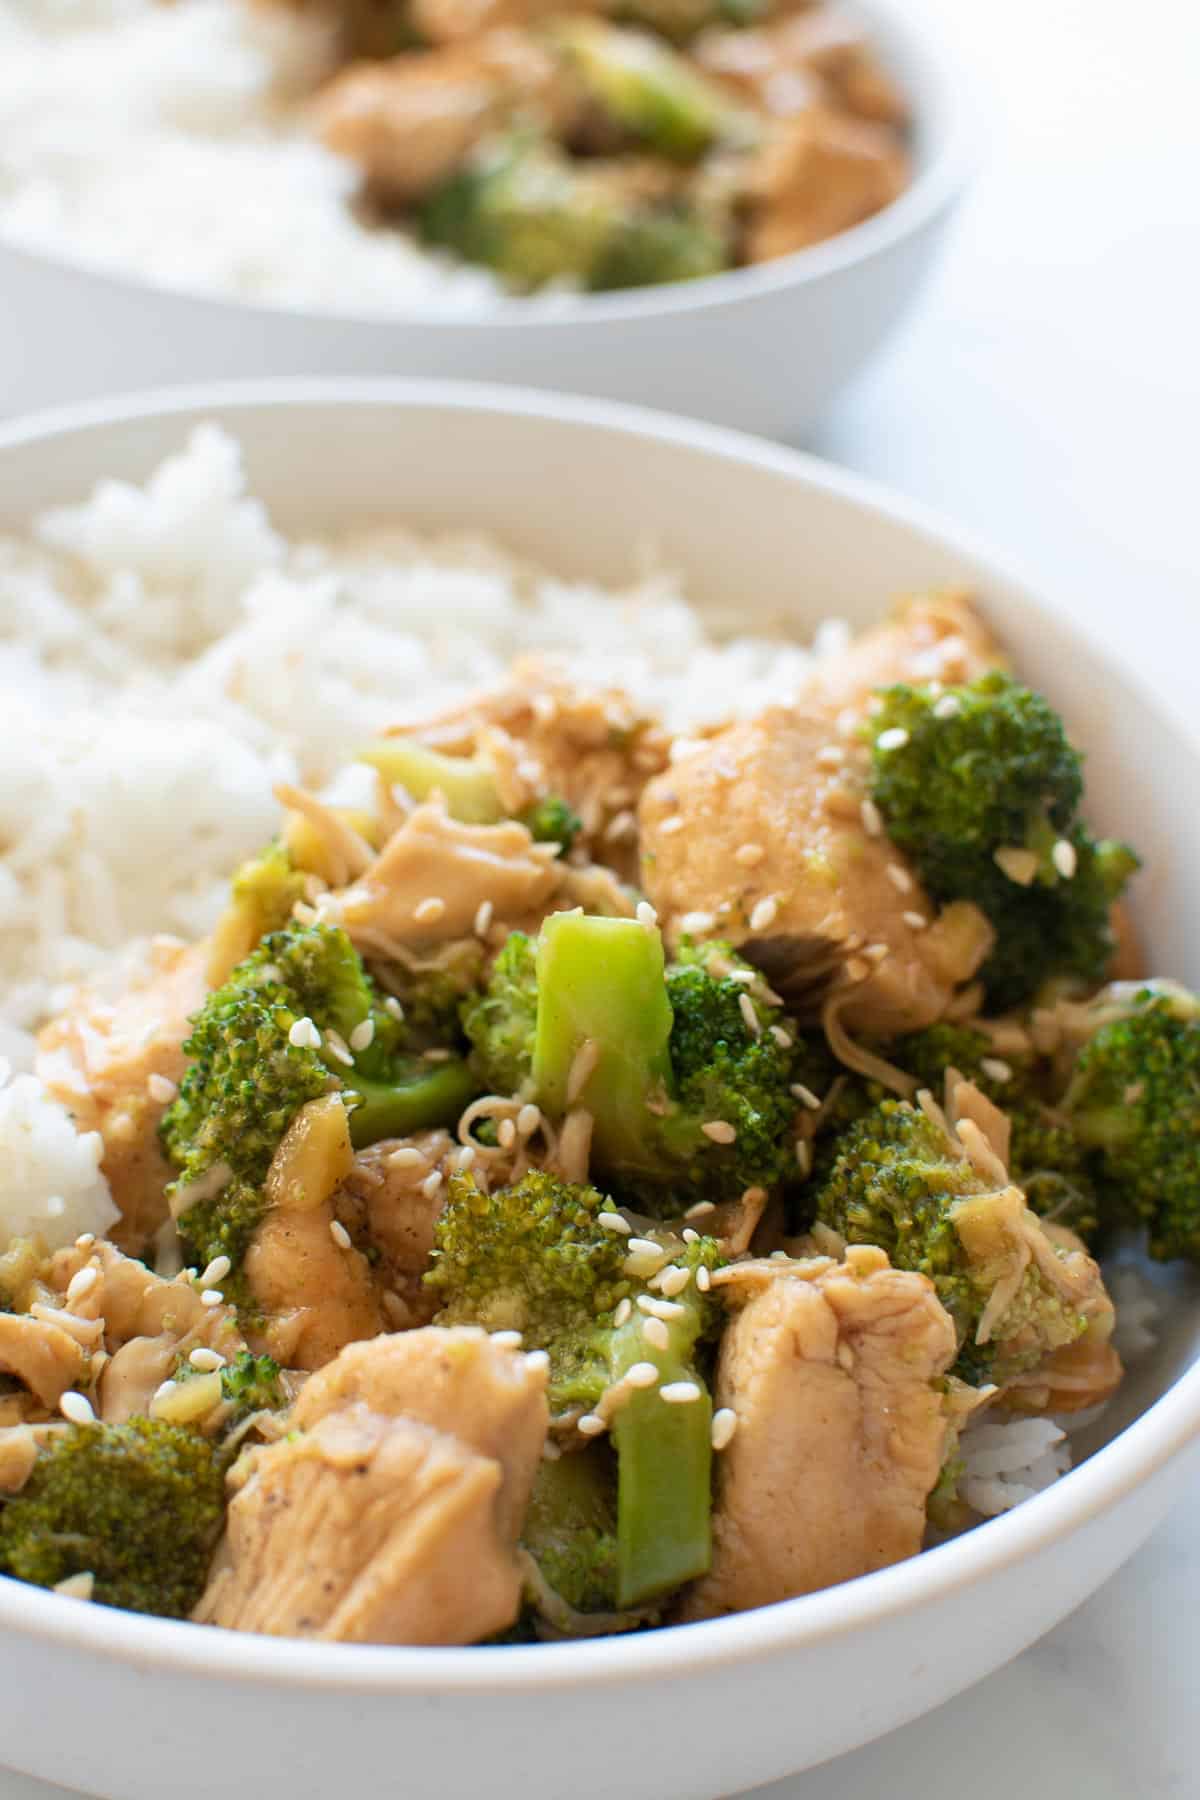 Close up image of a bowl of broccoli and chicken.